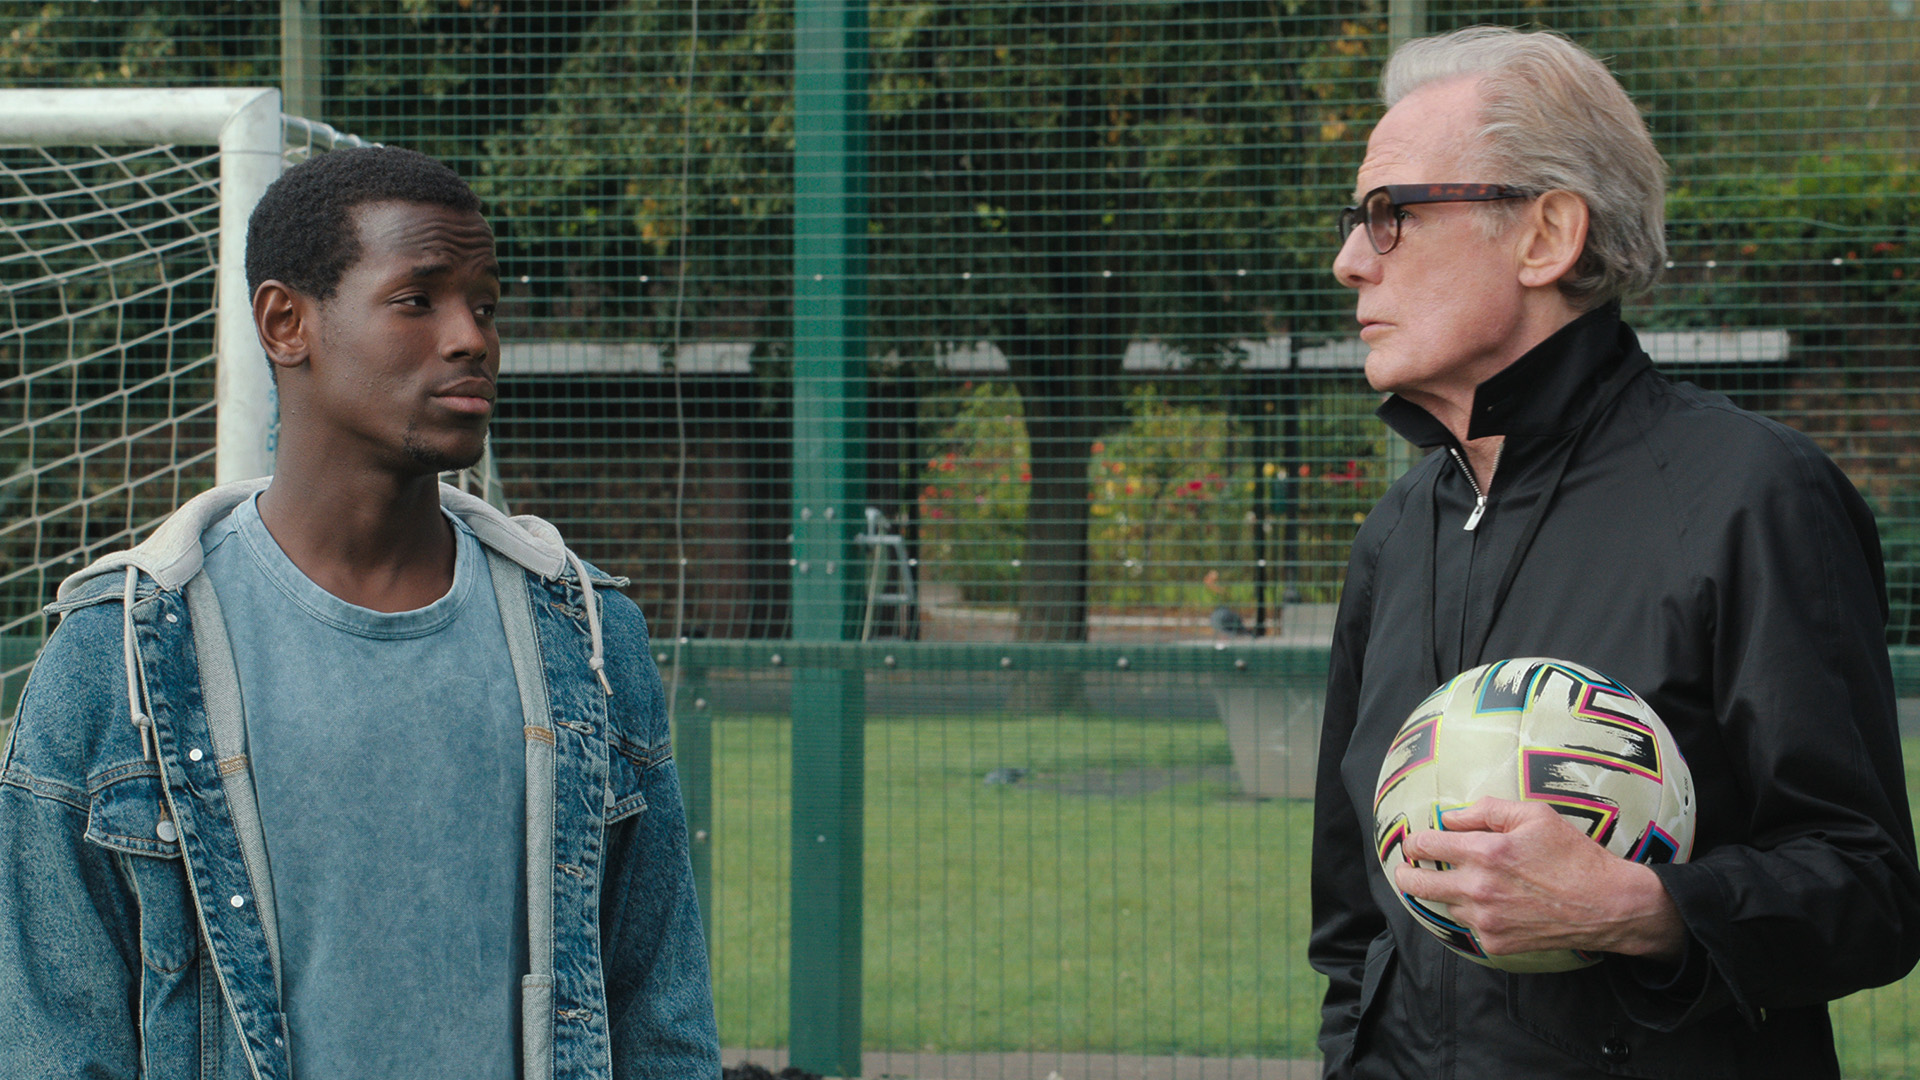 Bill Nighy and Micheal Ward in Netflix film The Beautiful Game. Image: Netflix